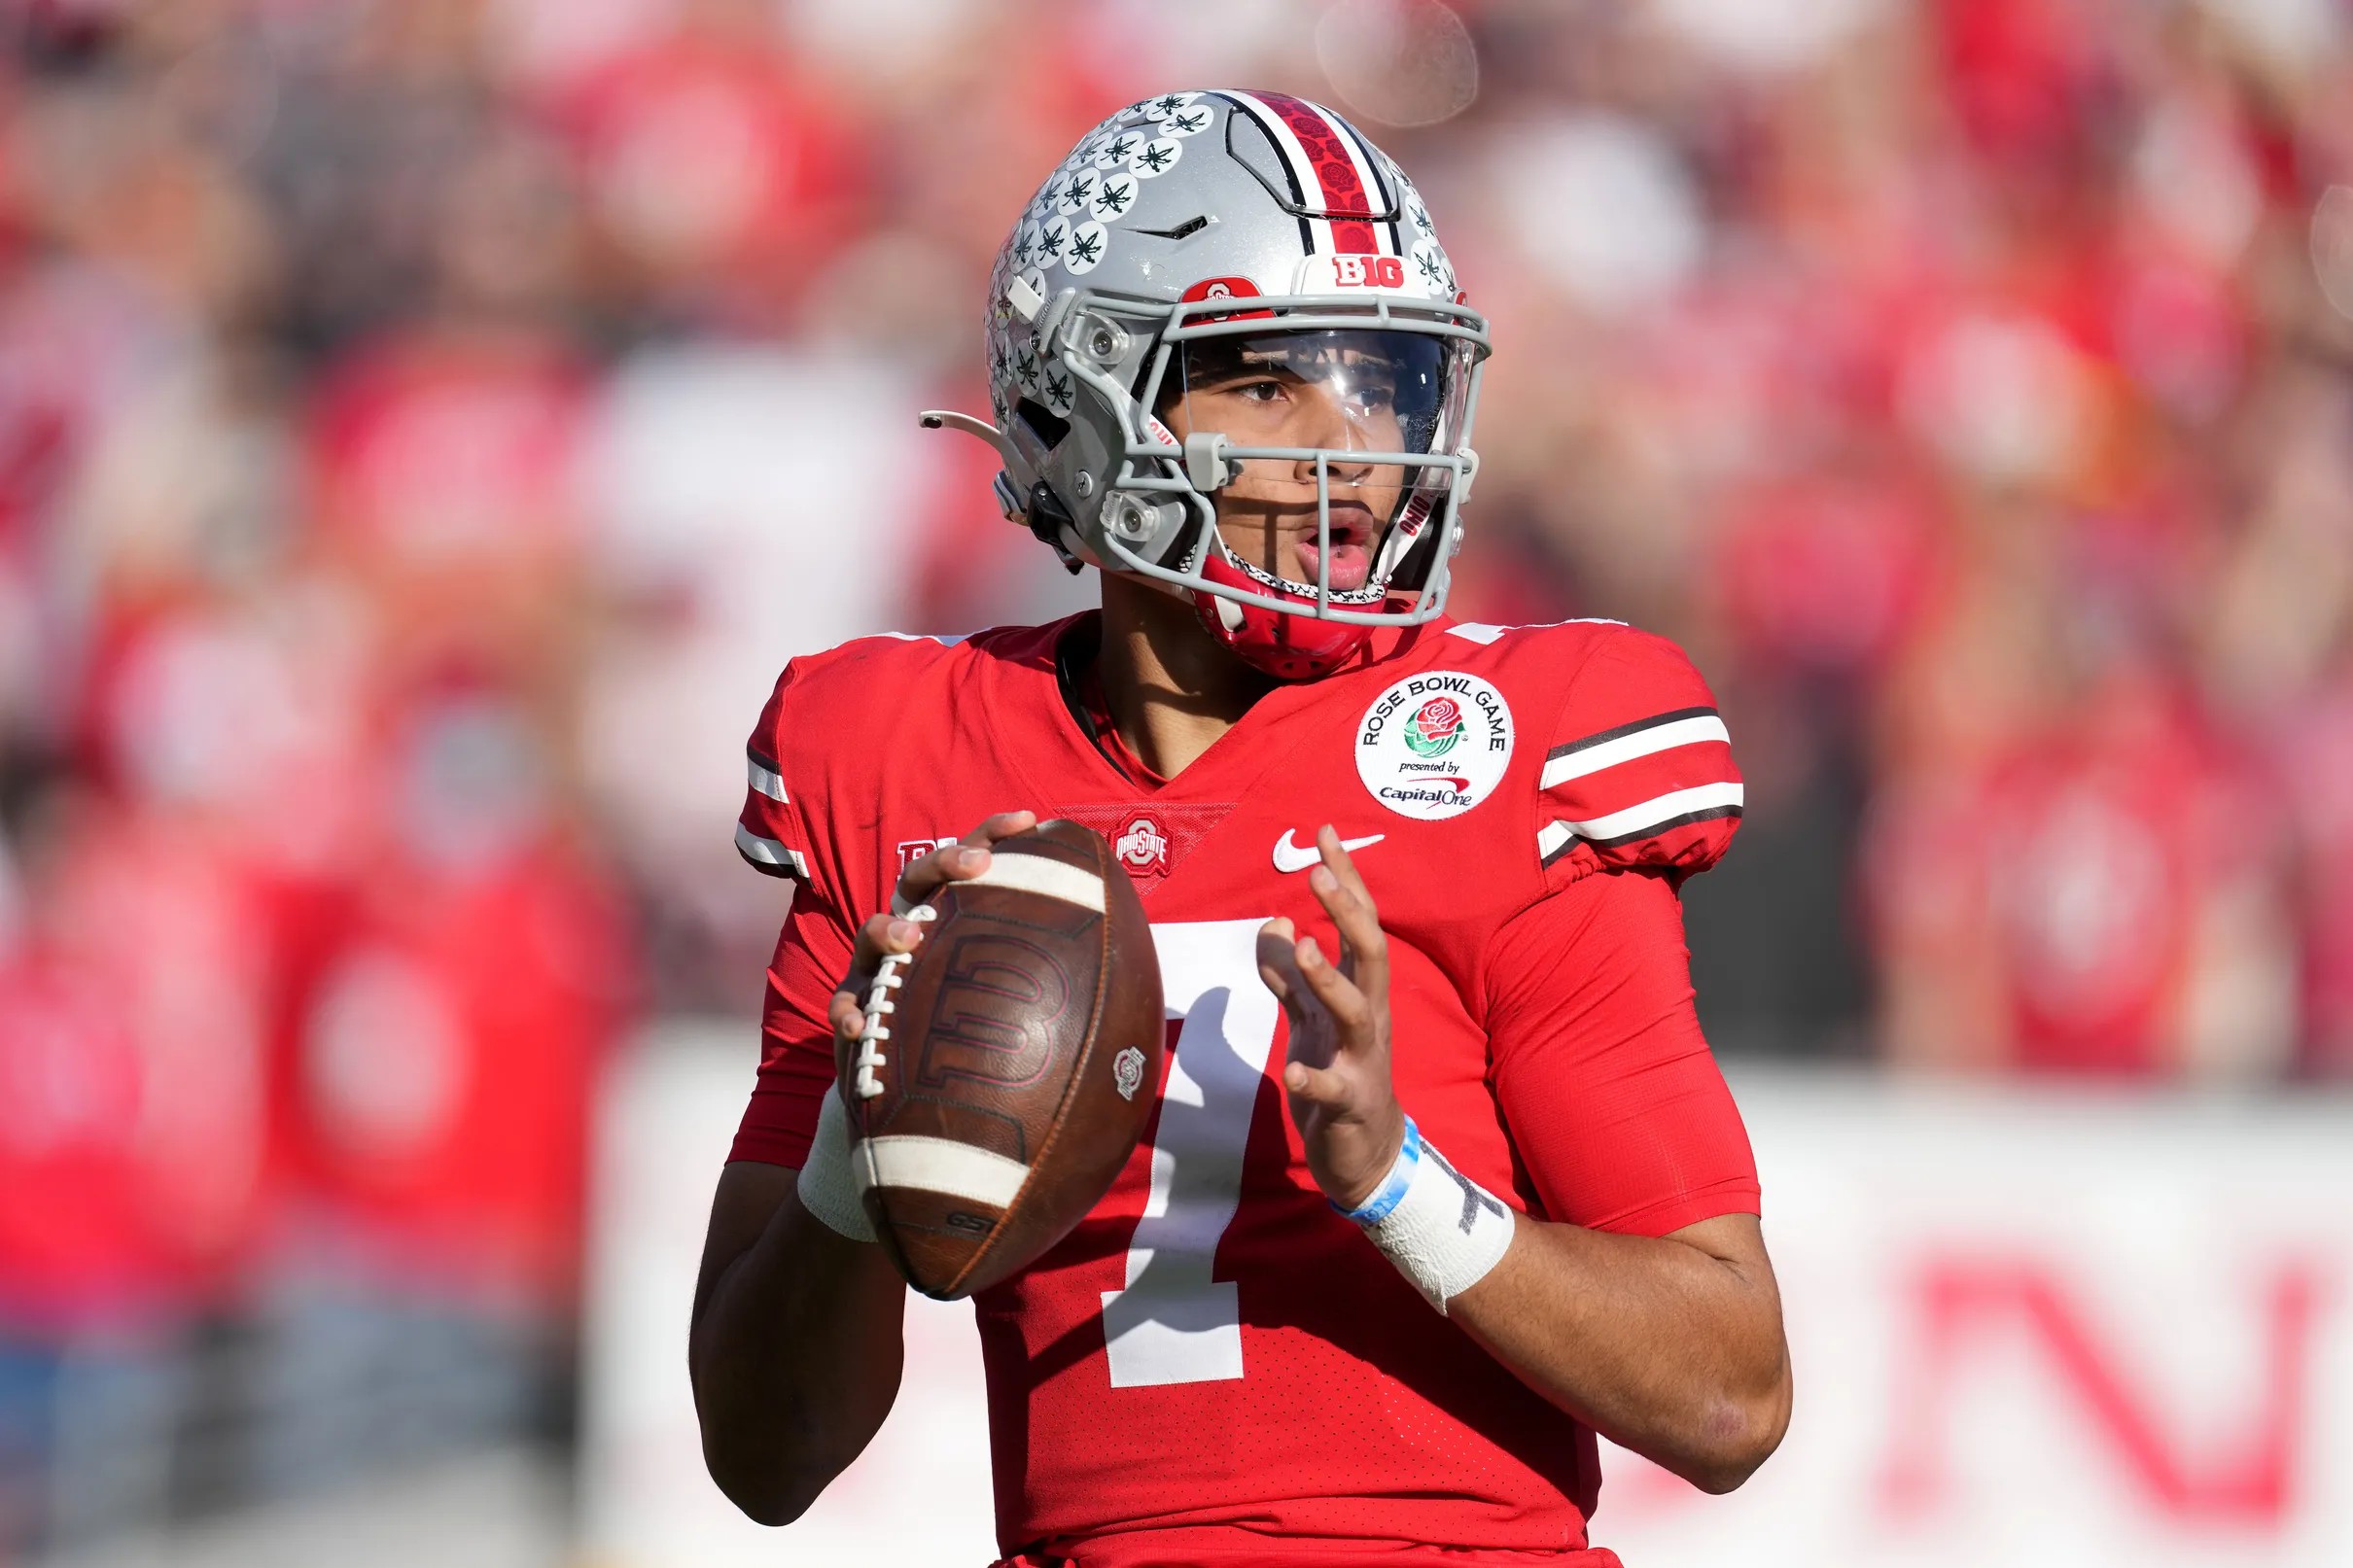 Five Ohio State players named on ESPN’s top 100 college football